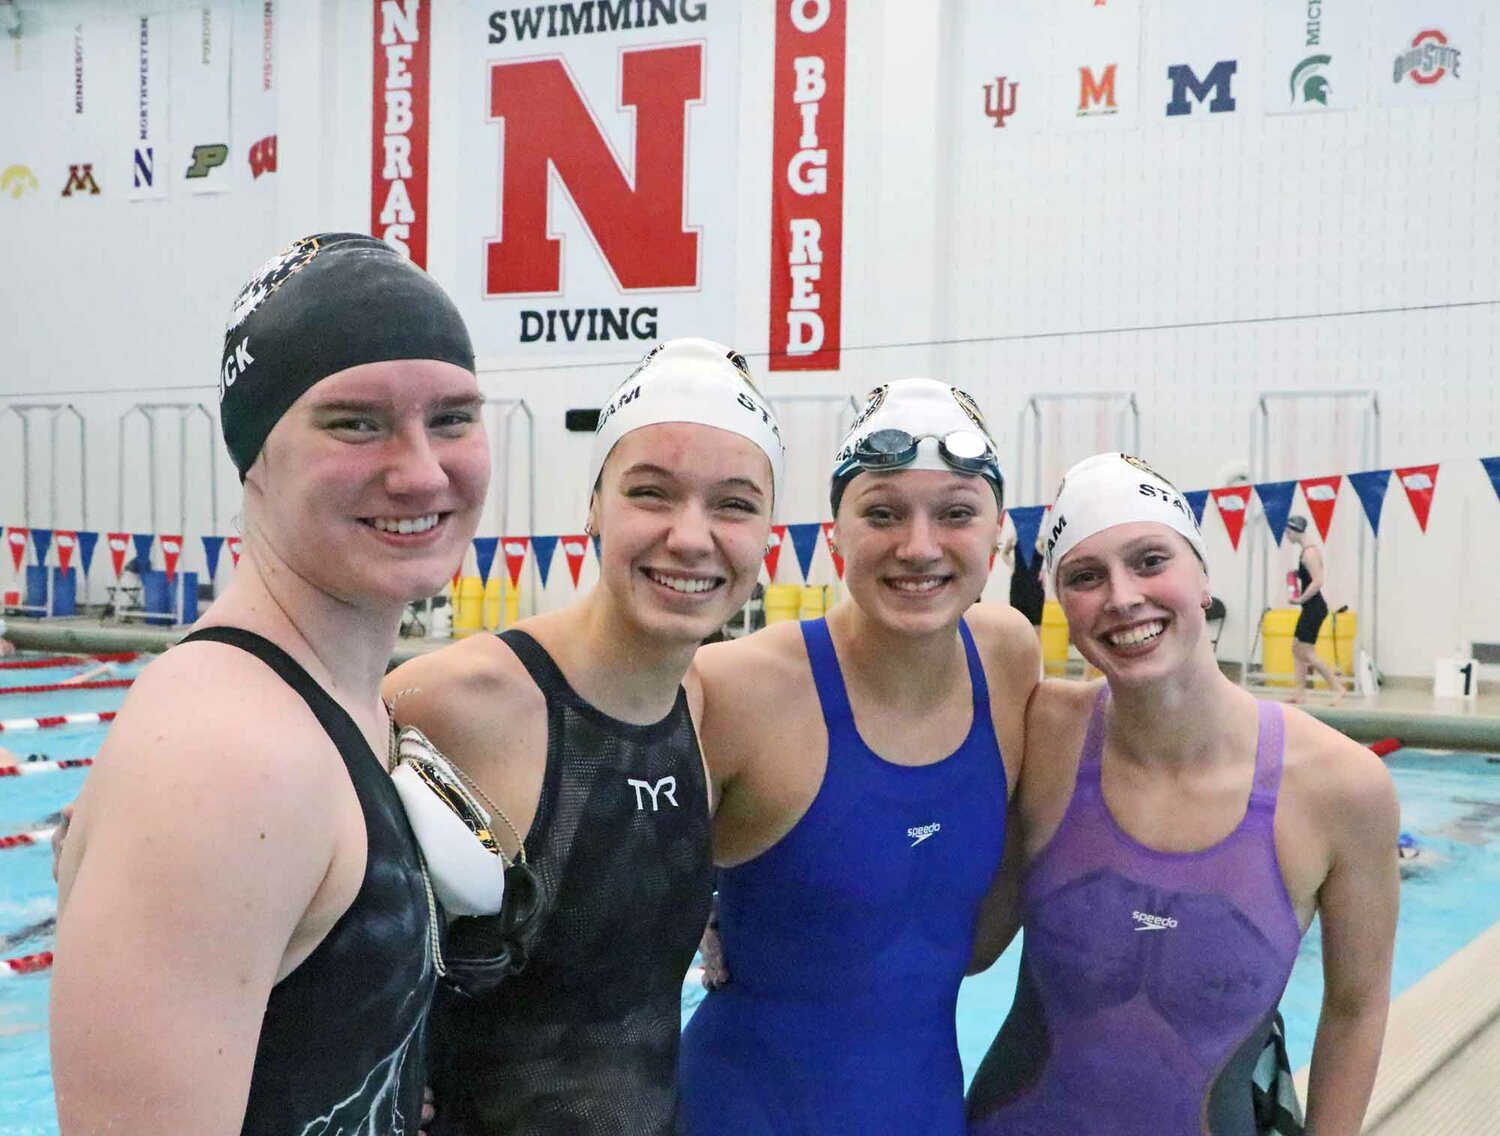 Fremont Tigers Madelyn Buck, from left, Jane Busboom, Lizzie Meyer and Ryleigh Schroeter pose for a photo Friday after setting a new 400-yard freestyle relay school record during the NSAA State Swimming & Diving Championships in Lincoln. Buck attends FHS, while Busboom and Schroeter are Blair student-athletes, and Lizzie Meyer is a multi-sport athlete at Arlington.